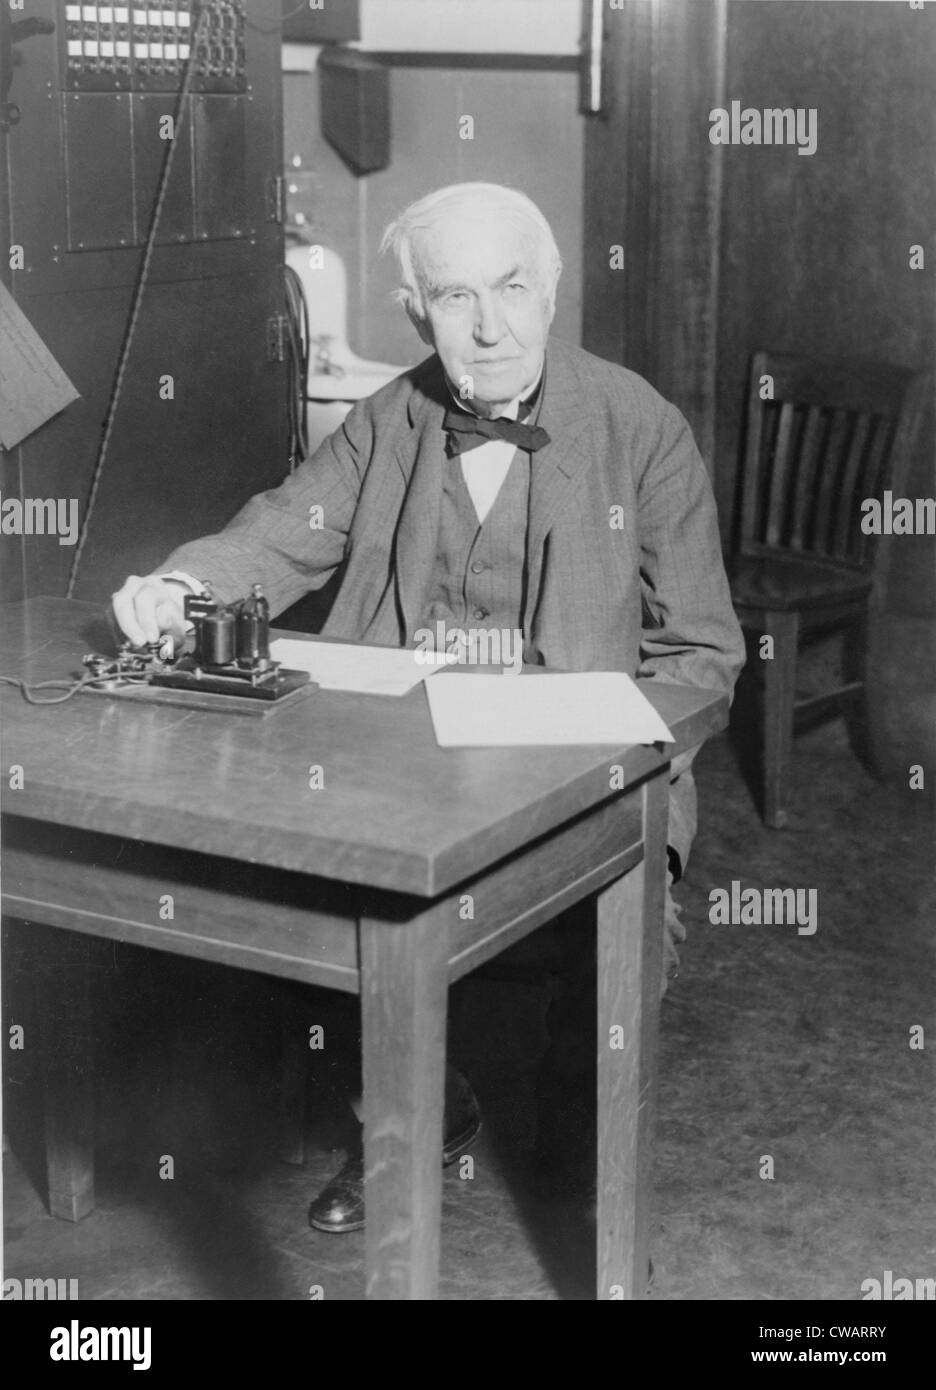 Thomas Edison, seated at desk, demonstrating an old telegraph transmitter in his West Orange, New Jersey, laboratory, 1930. Stock Photo